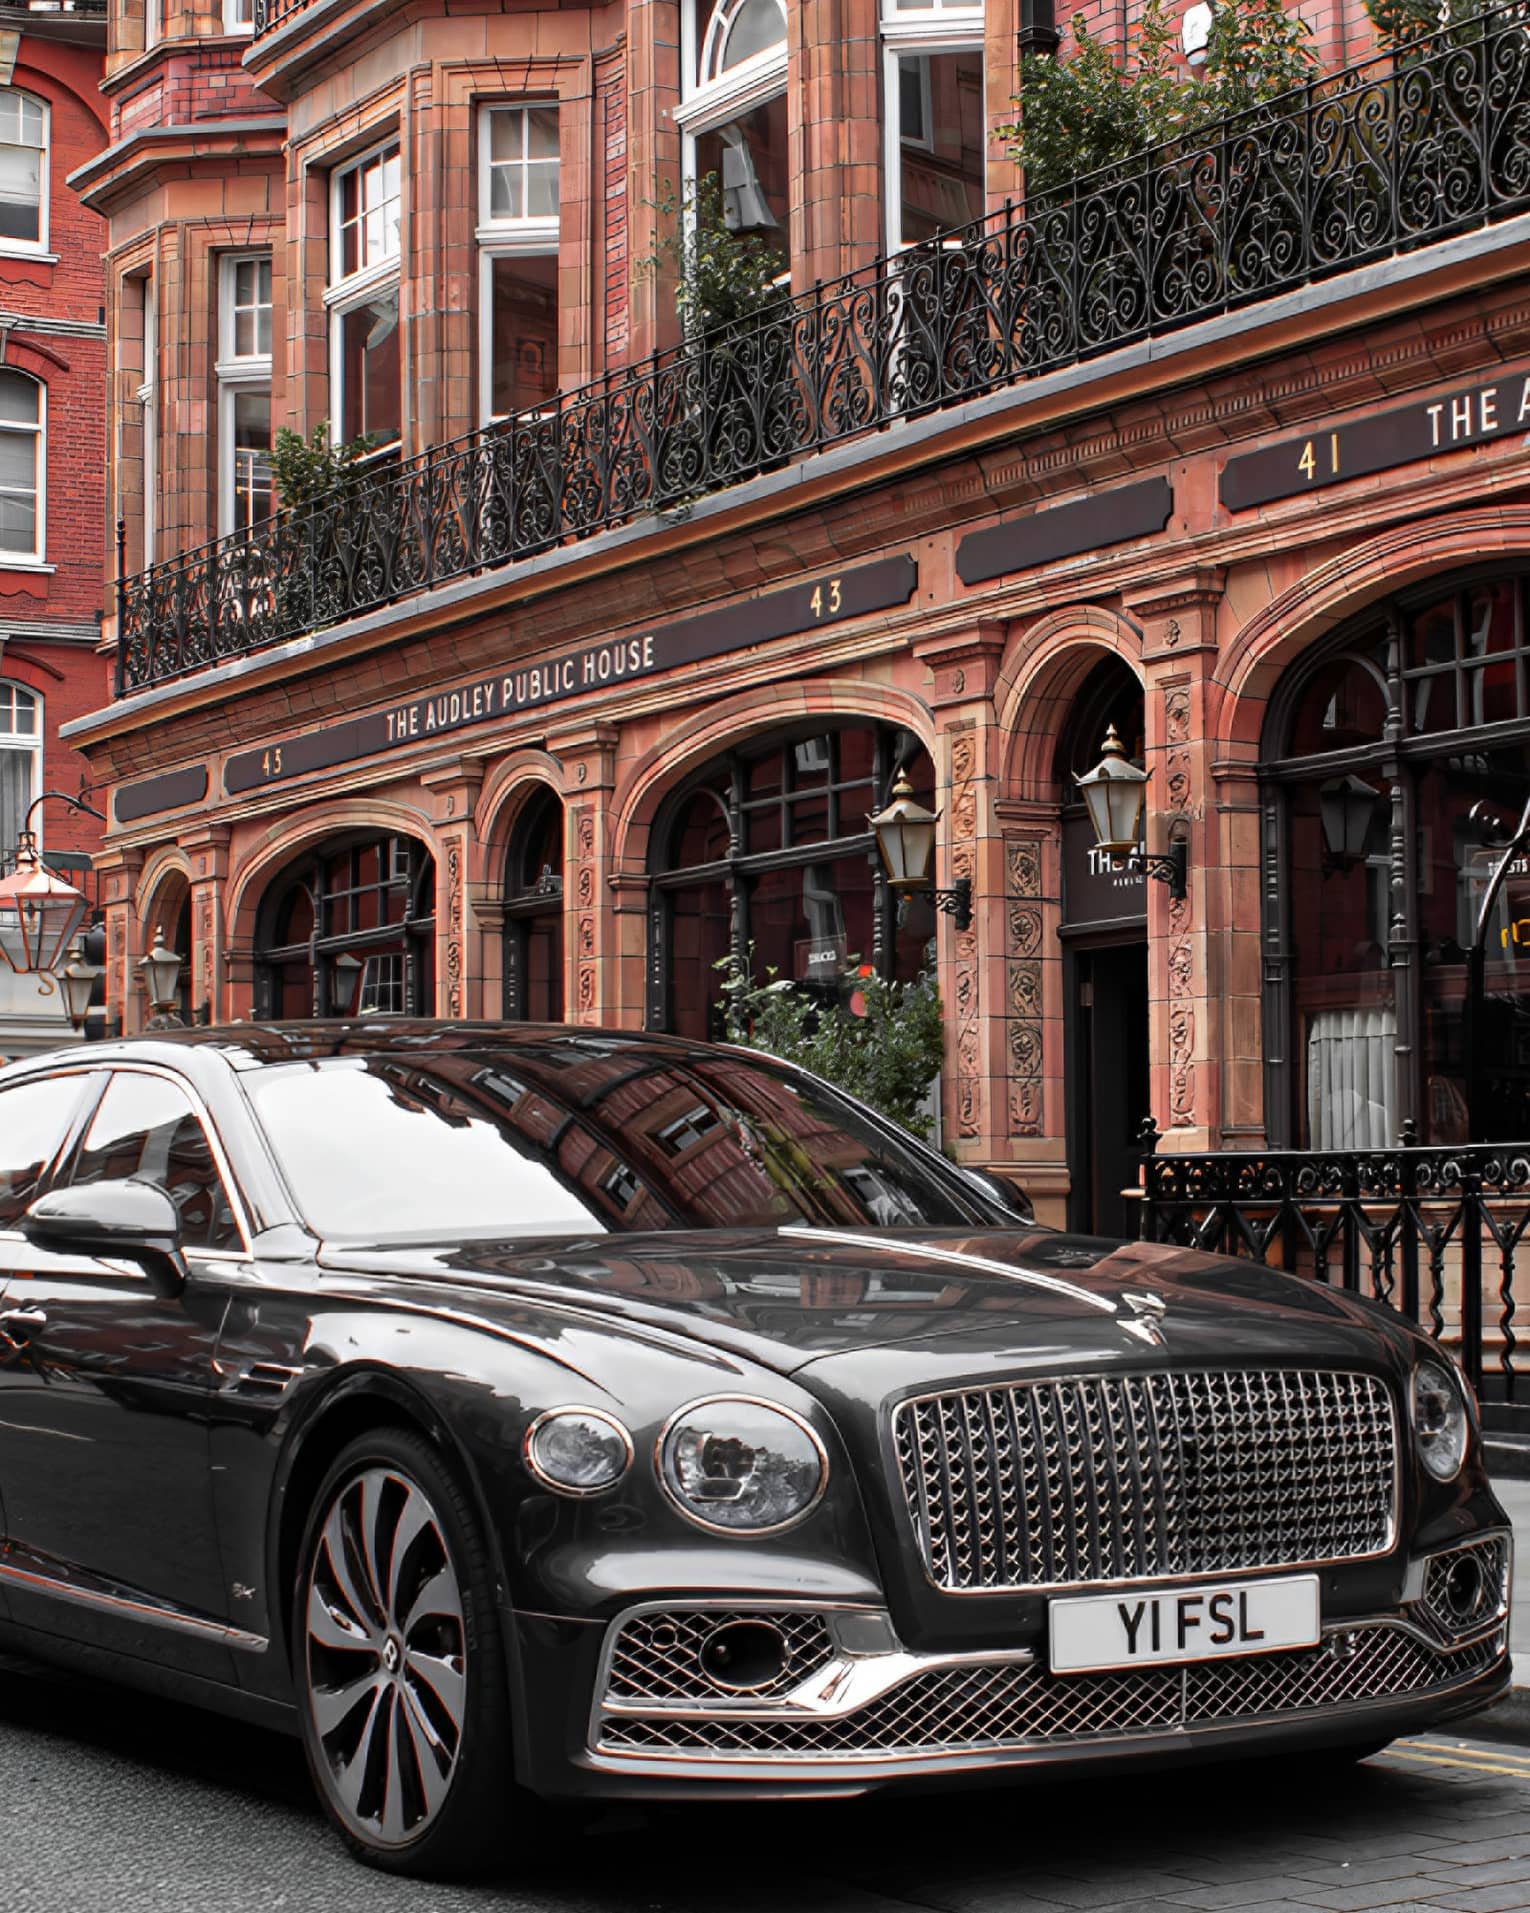 Close-up front view of shiny black modern Bentley with an elaborate grille parked in front of a restored Victorian building.